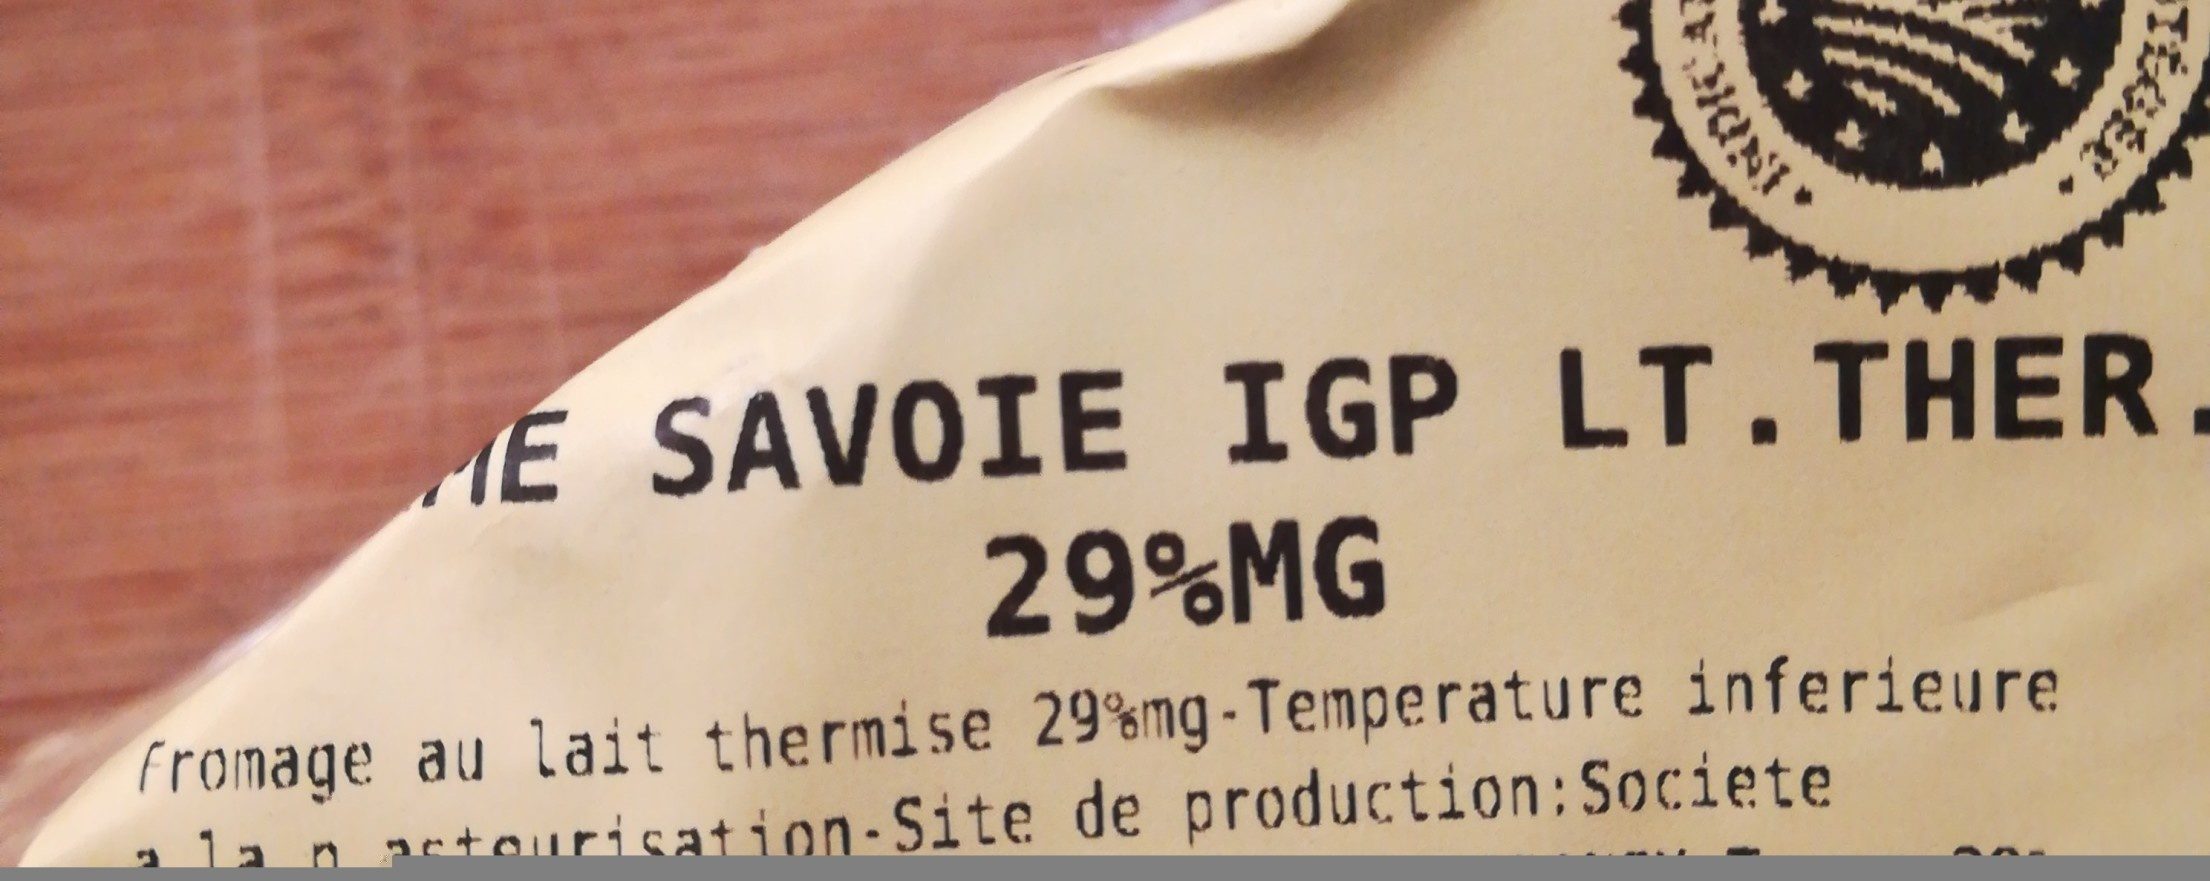 Tomme Savoie IGP LT THER. 29%MG - Ingredients - fr